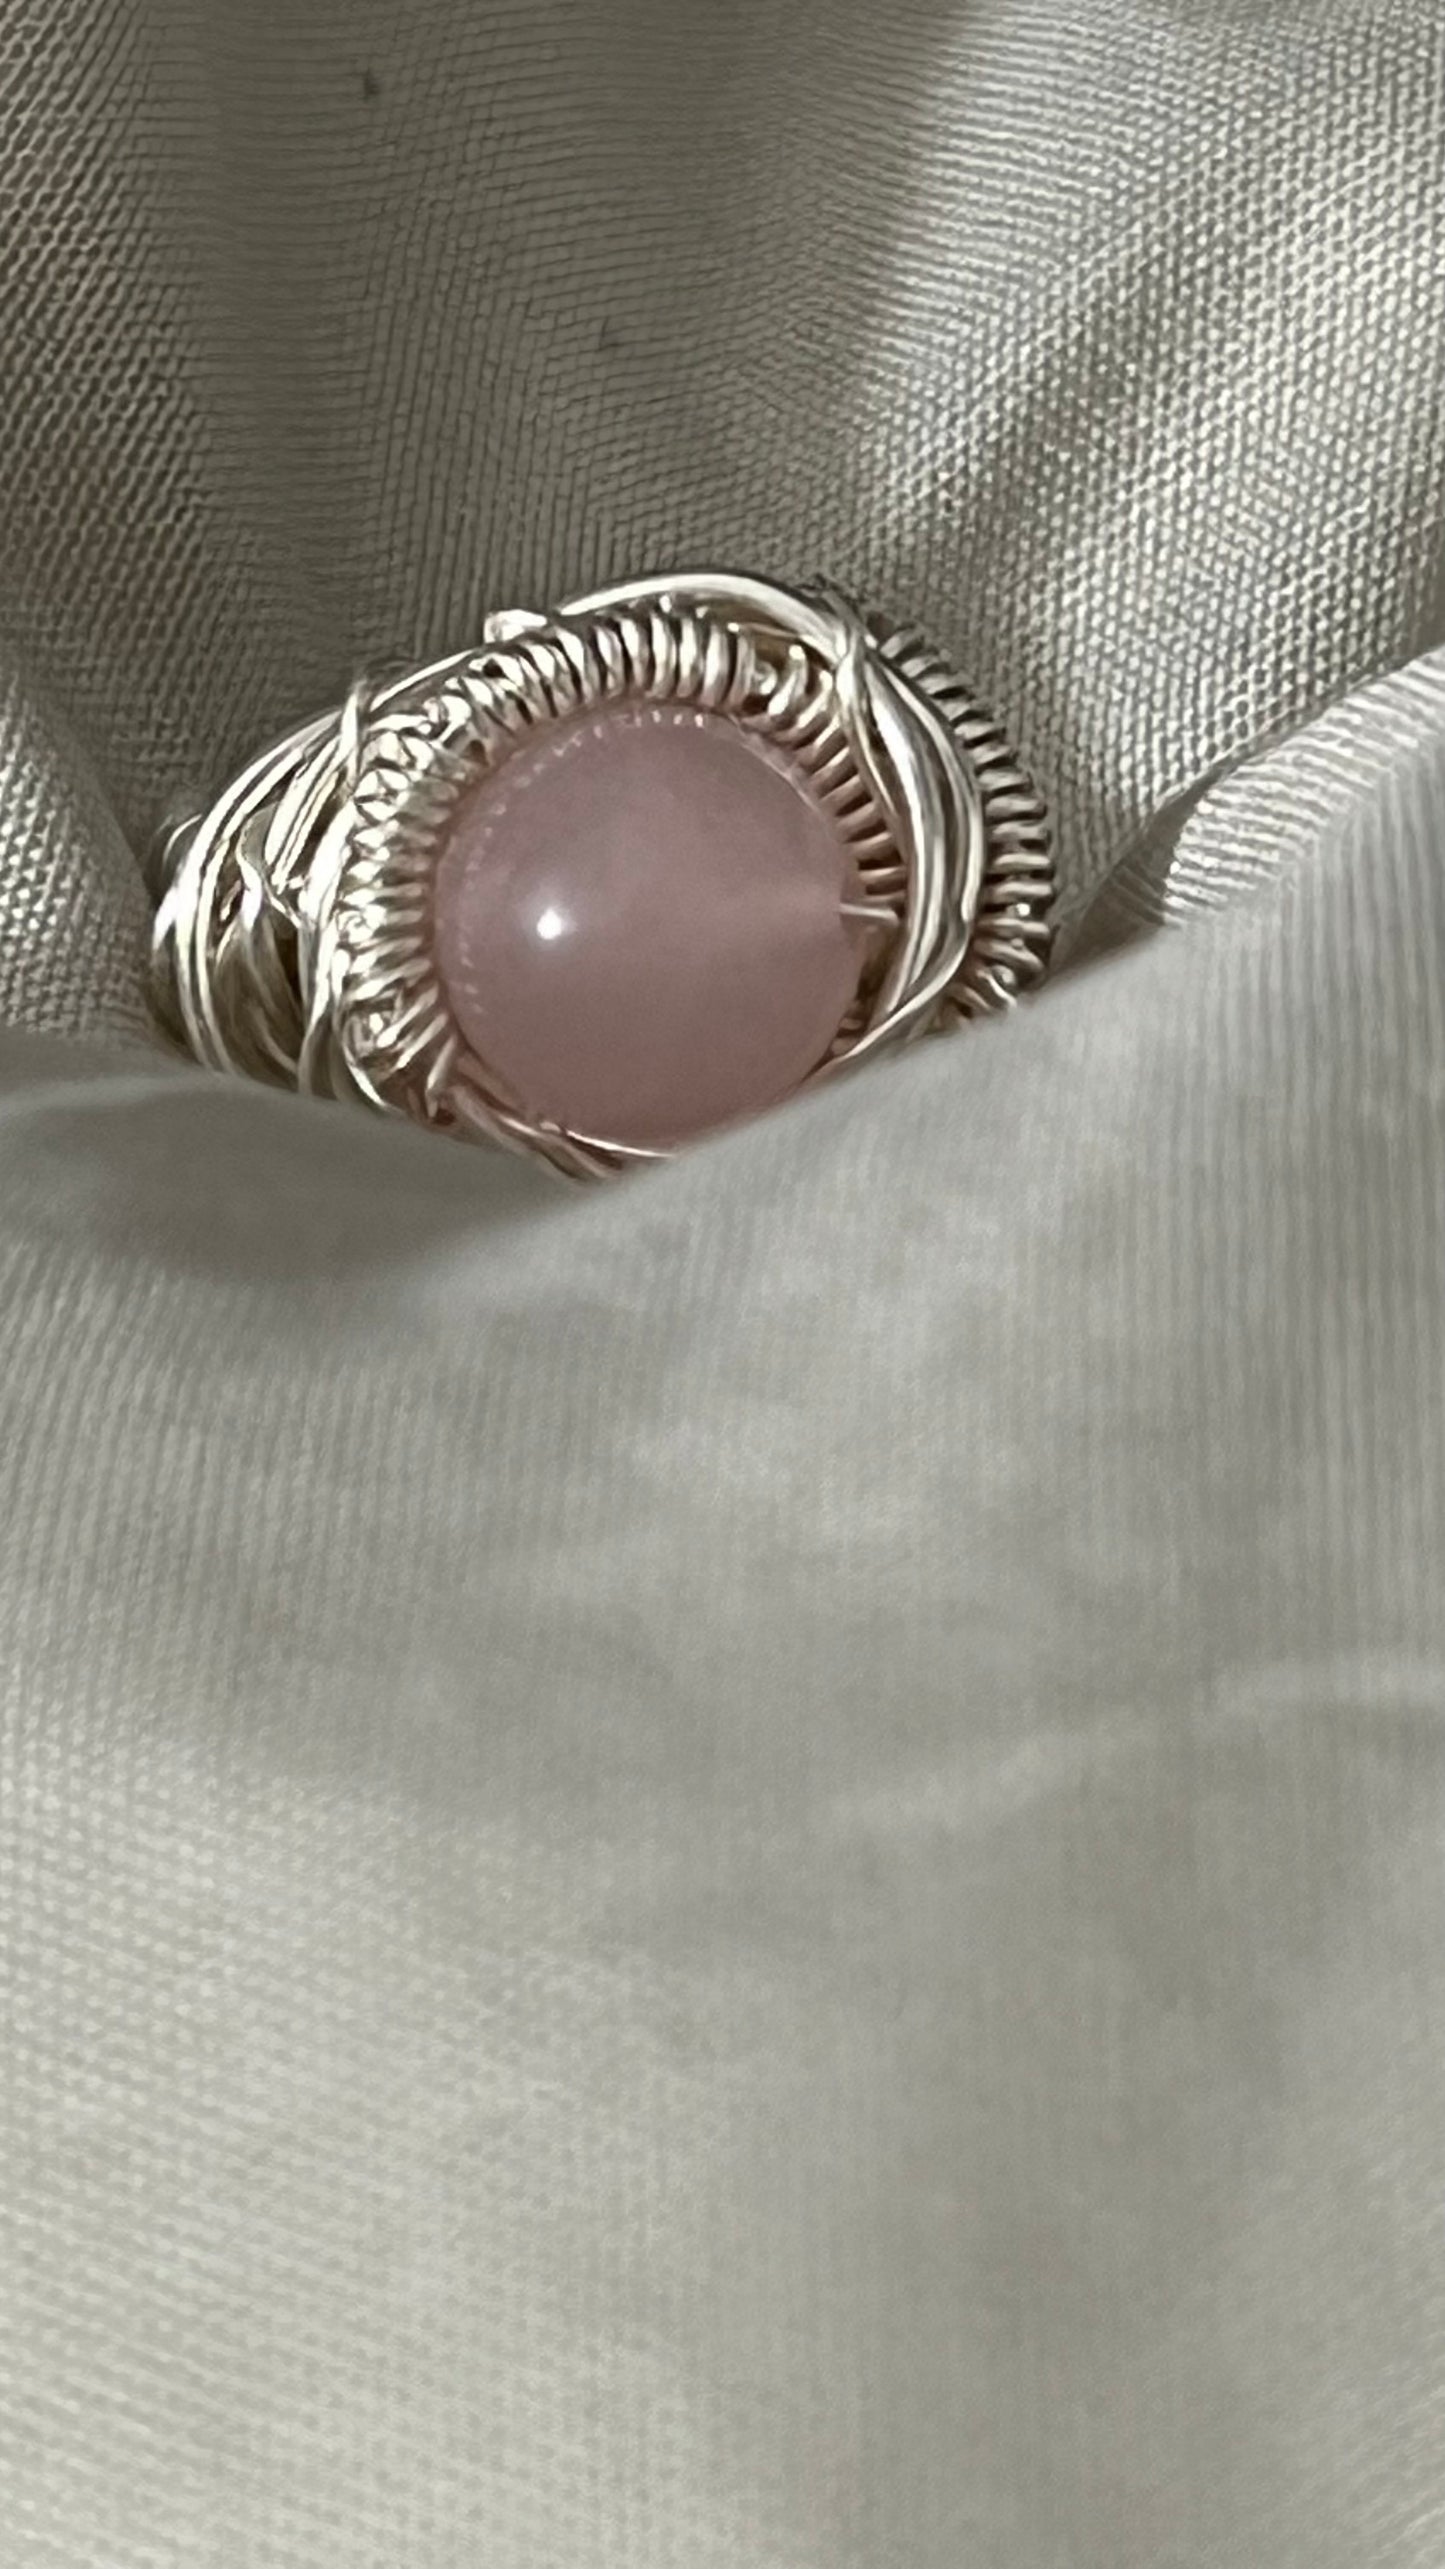 Rose Quartz Ring (size 5.5)- unconditional love! It's said to boost feelings of self-love and foster loving relationships with others